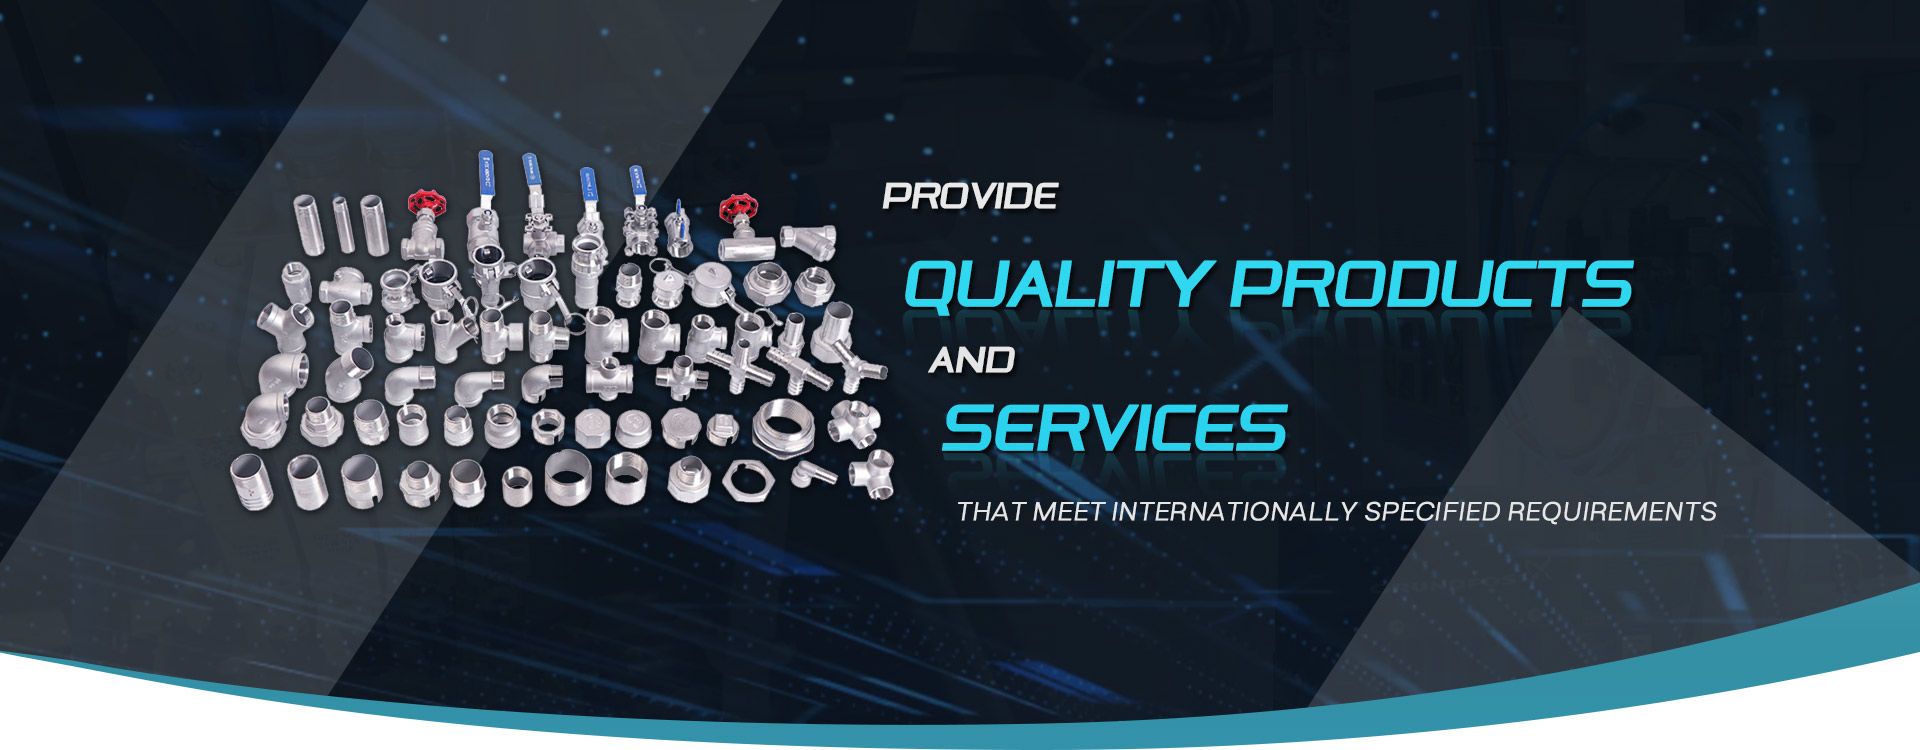 Provide quality products and services that meet internationally specified requirements